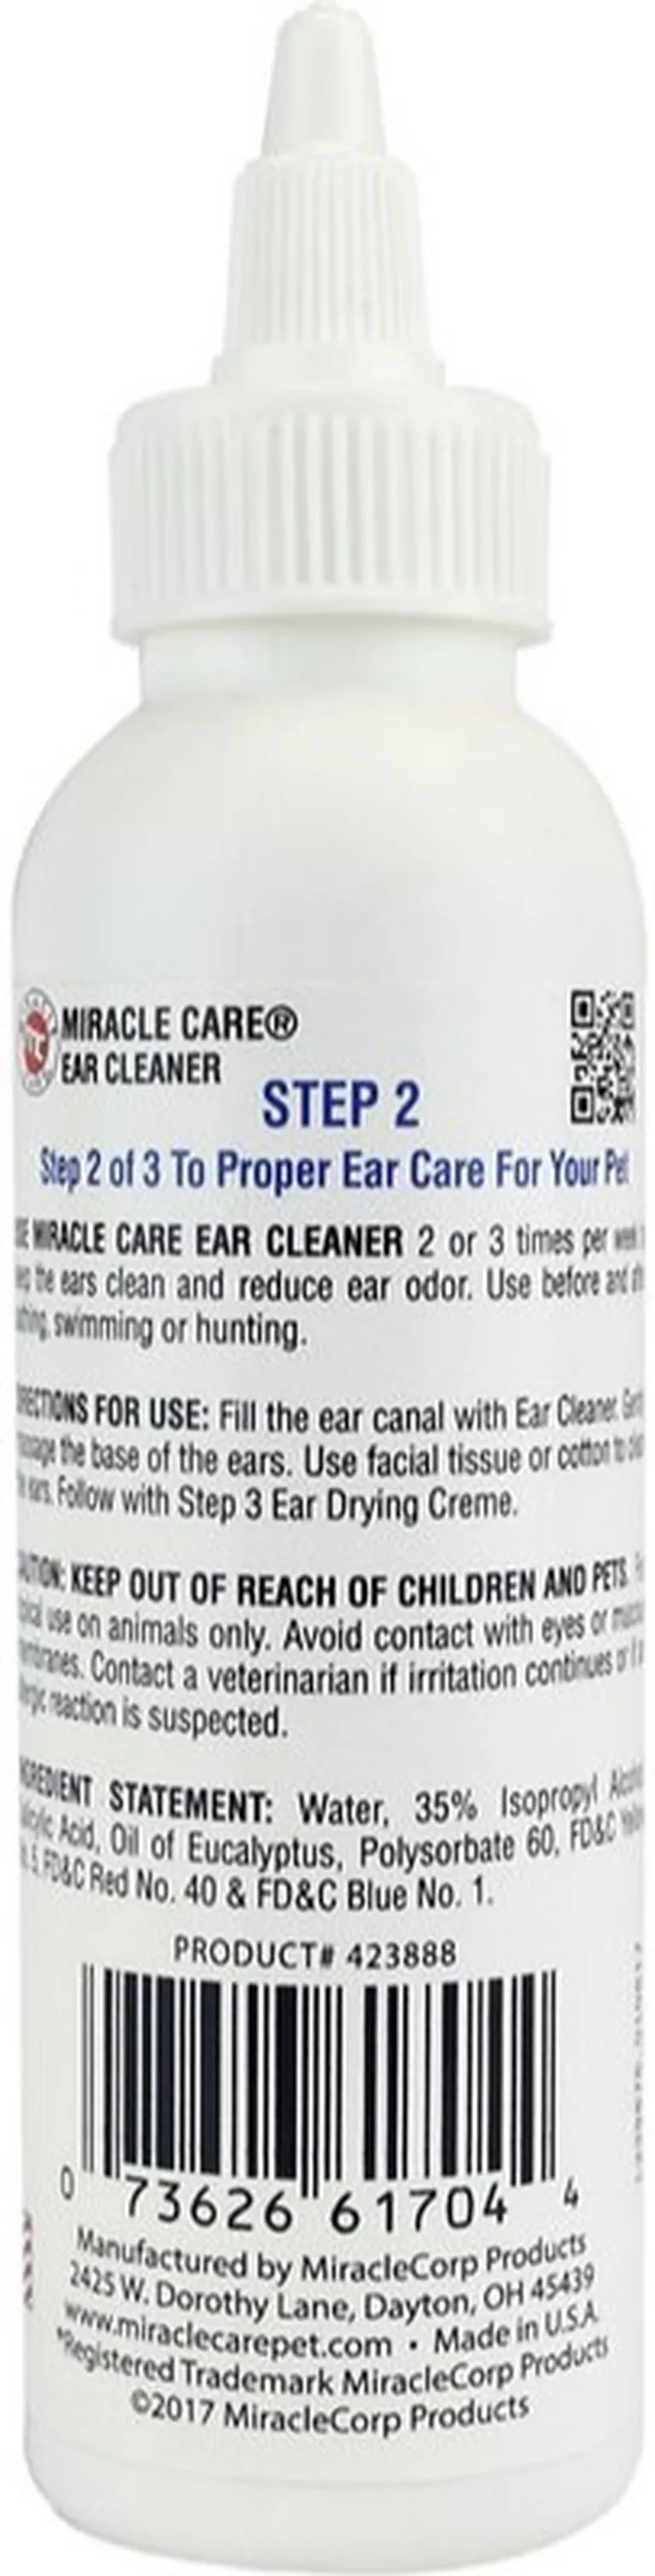 Miracle Care Ear Cleaner Step 2 Photo 2